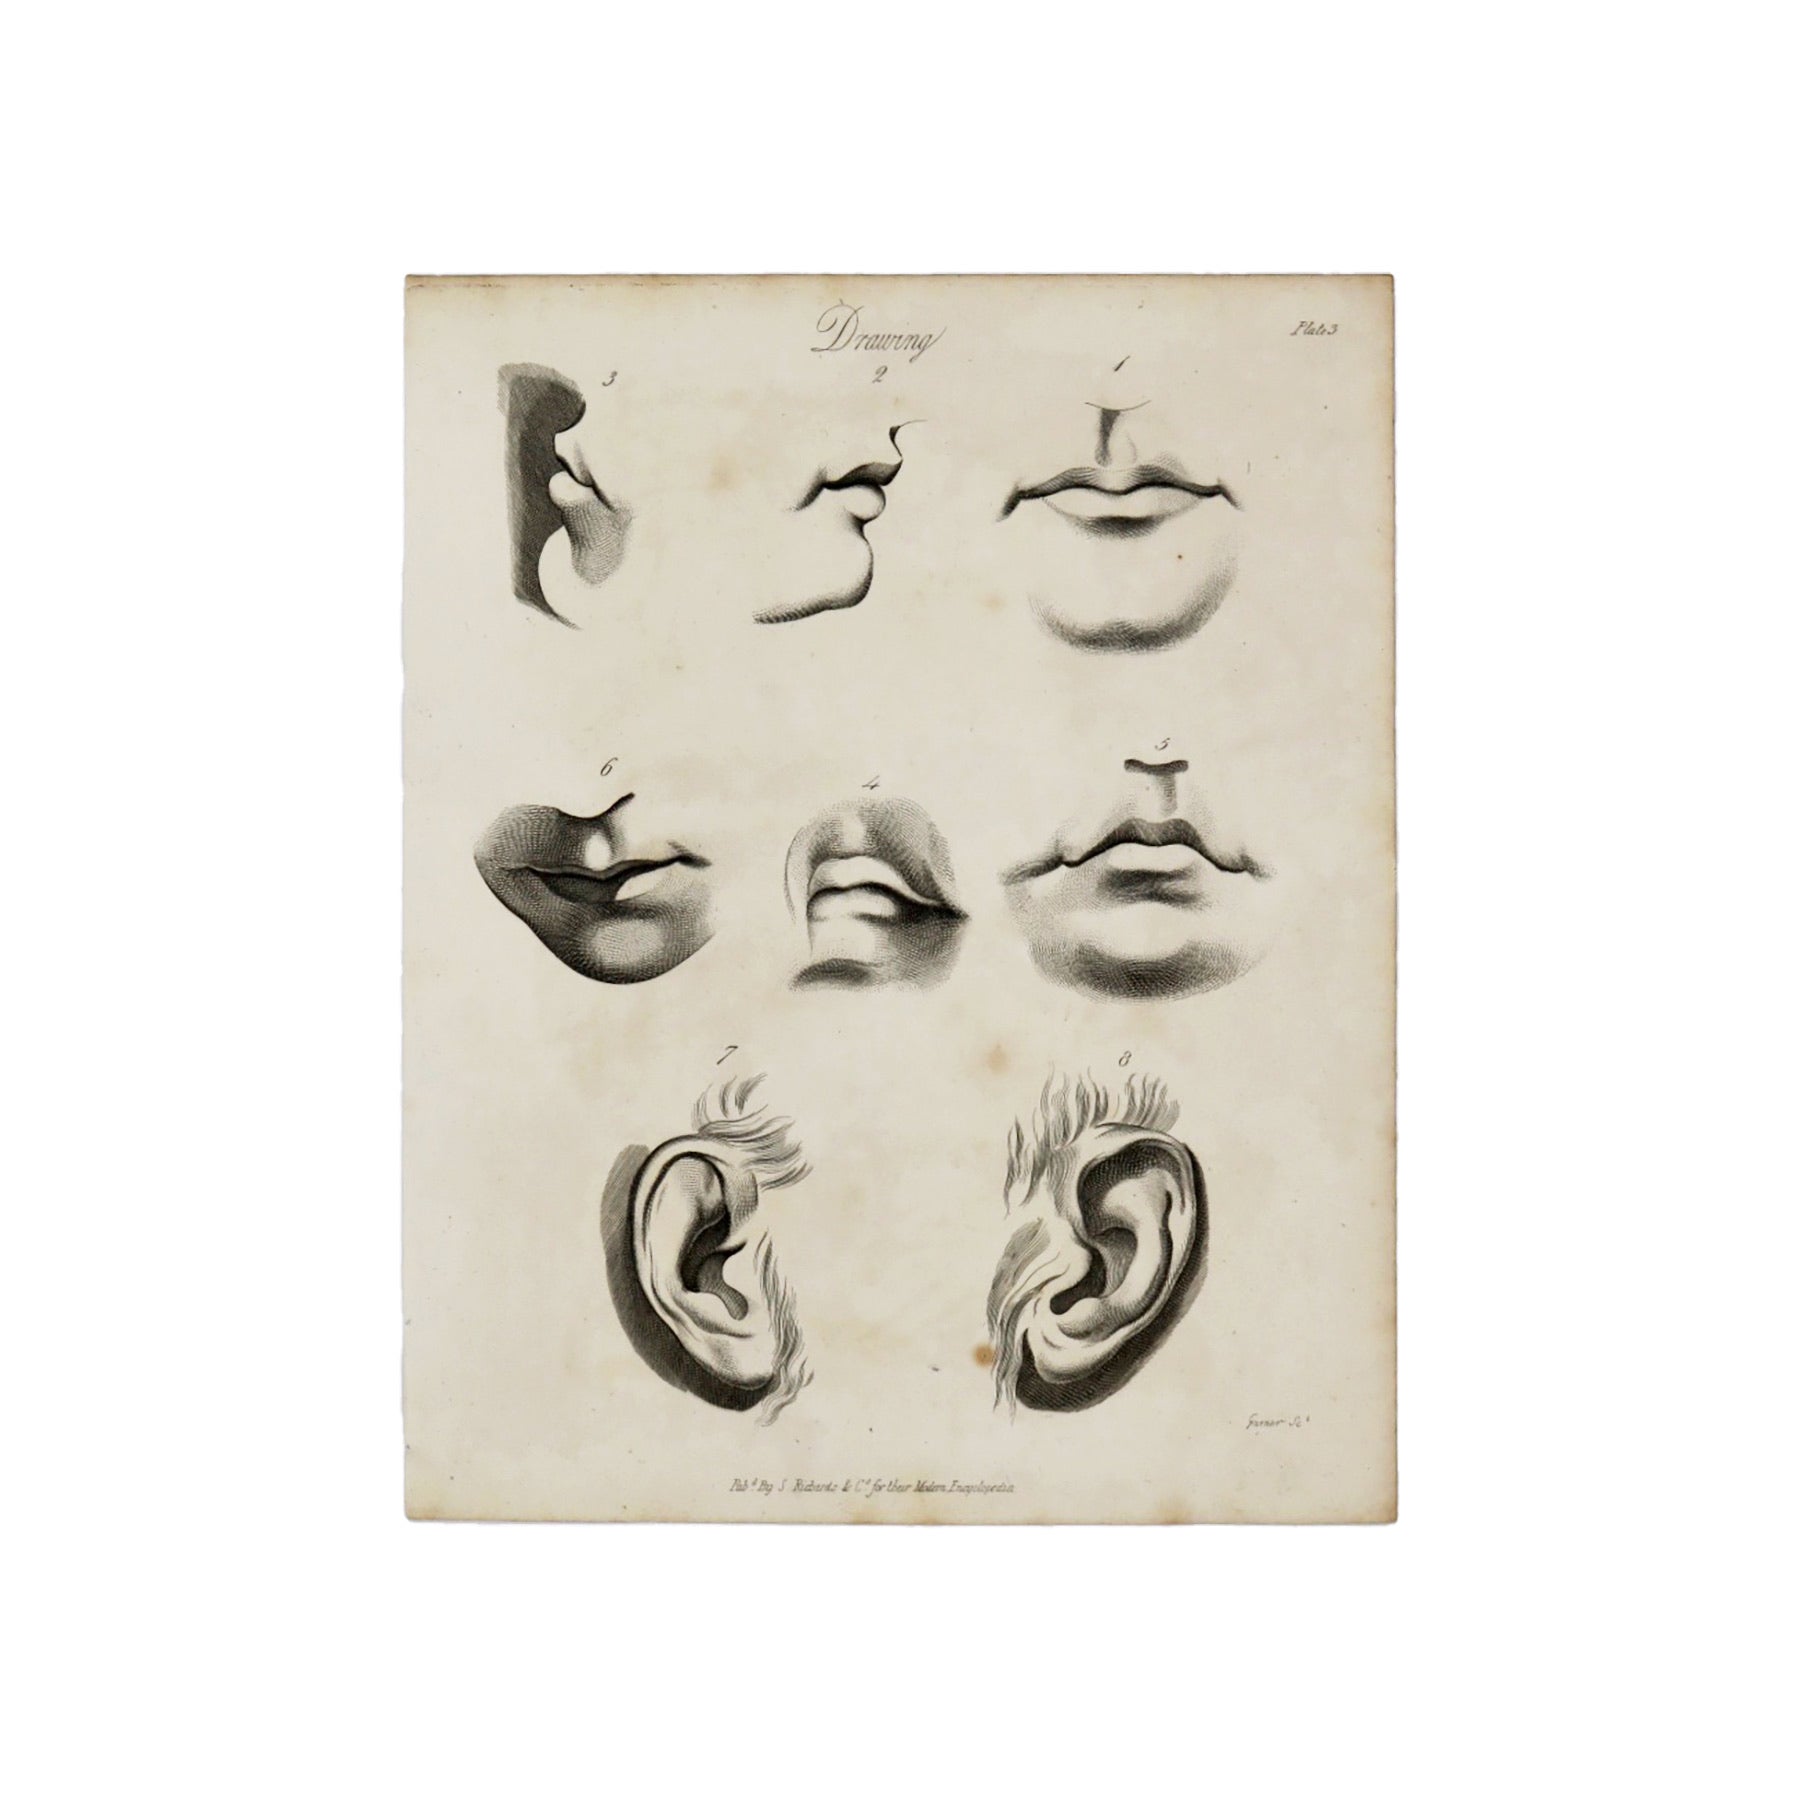 Drawing Plate 3 Antique 1820 Engraving from "The Modern Encyclopedia: The Latest Discoveries in each Department of Knowledge." 1820s etching of mouths and ears for drawing purposes Measures 10.5 x 8.25 inches